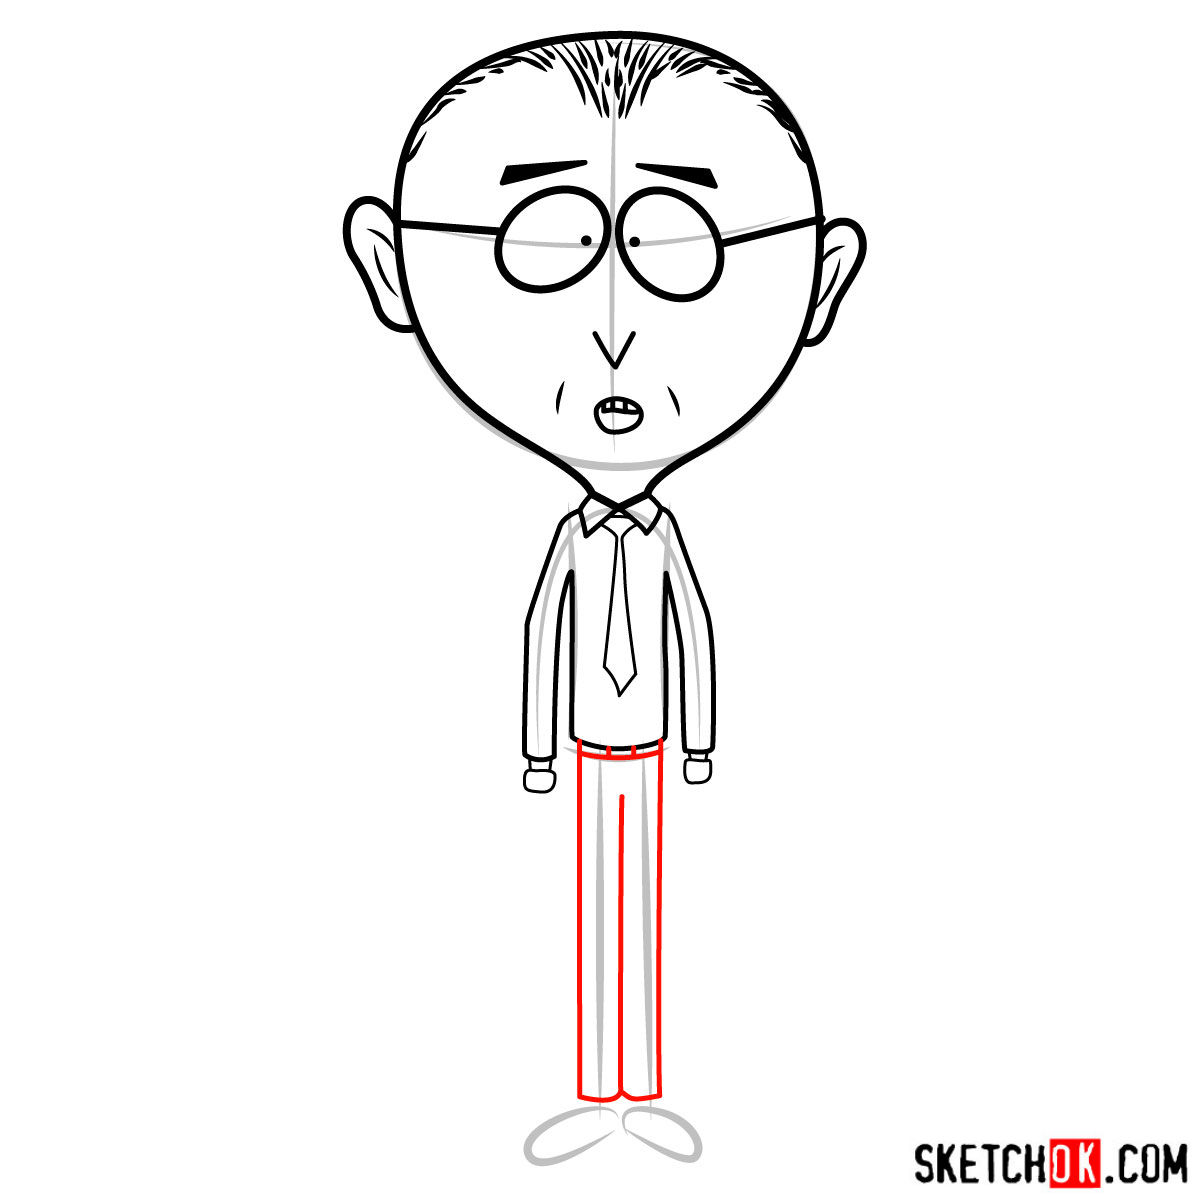 How to draw Mr. Mackey from South Park - step 07